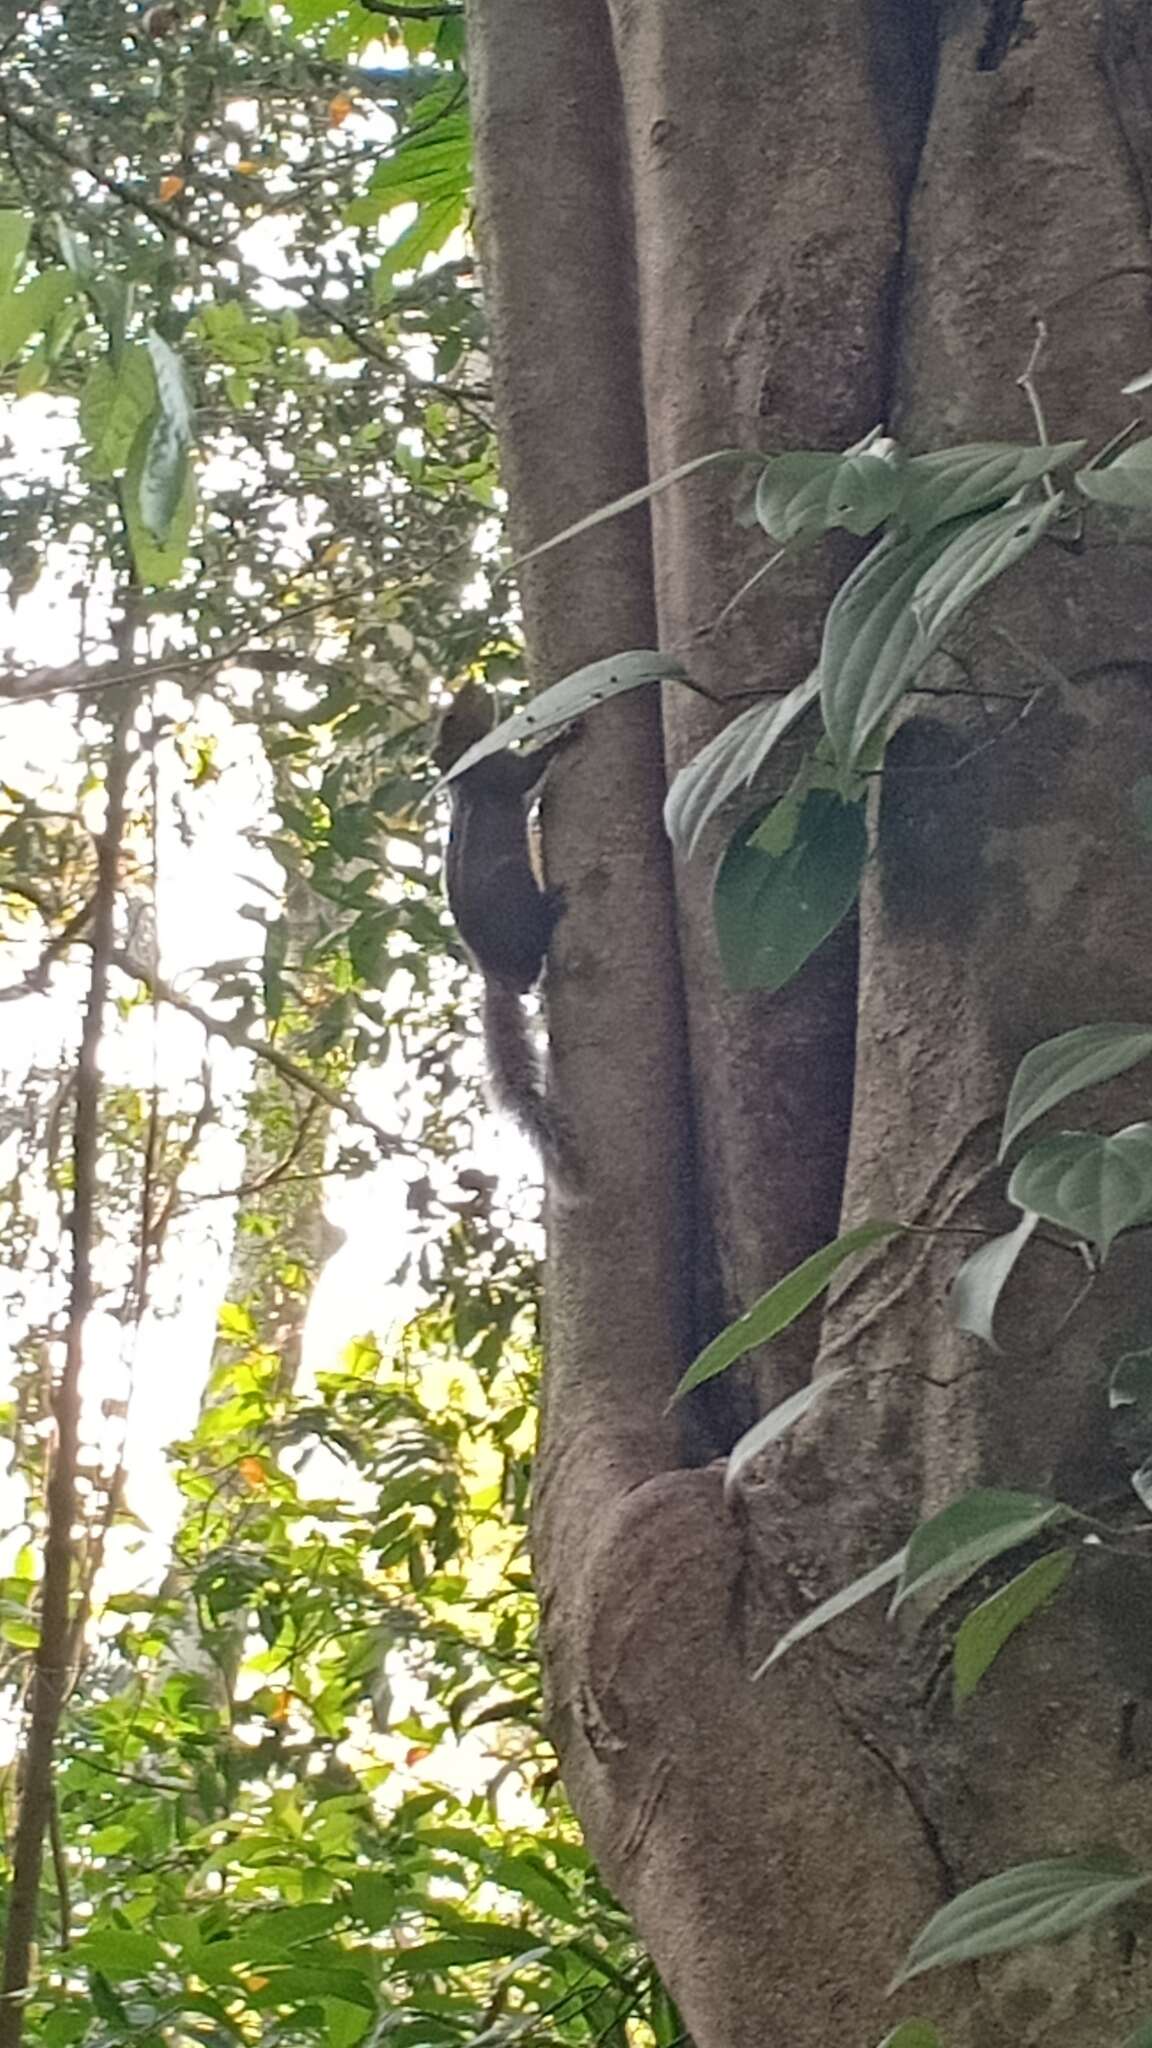 Image of Jungle Palm Squirrel